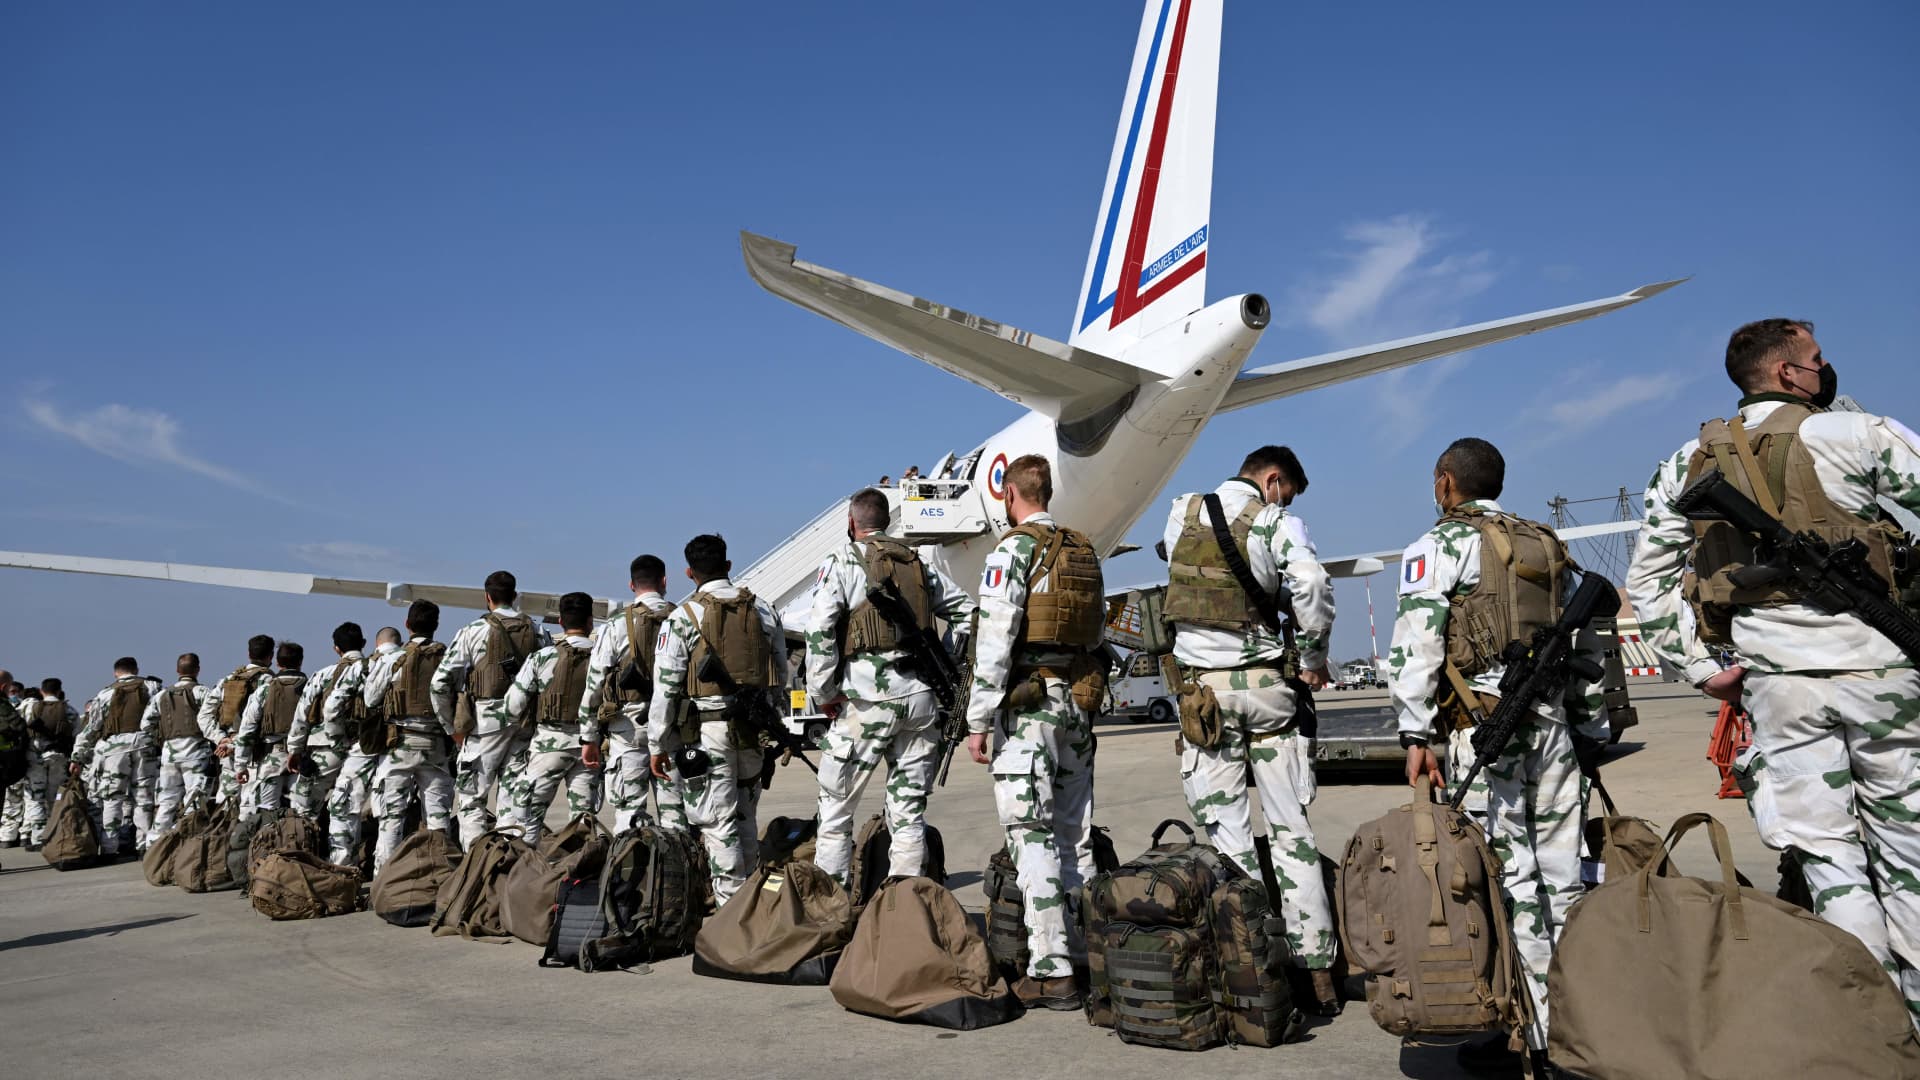 French soldiers of the 27th Bataillon des chasseurs alpins queue as they board an Airbus A330 MRTT at the French air force base of Istres, southern France on March 1, 2022, before taking off for Romania.